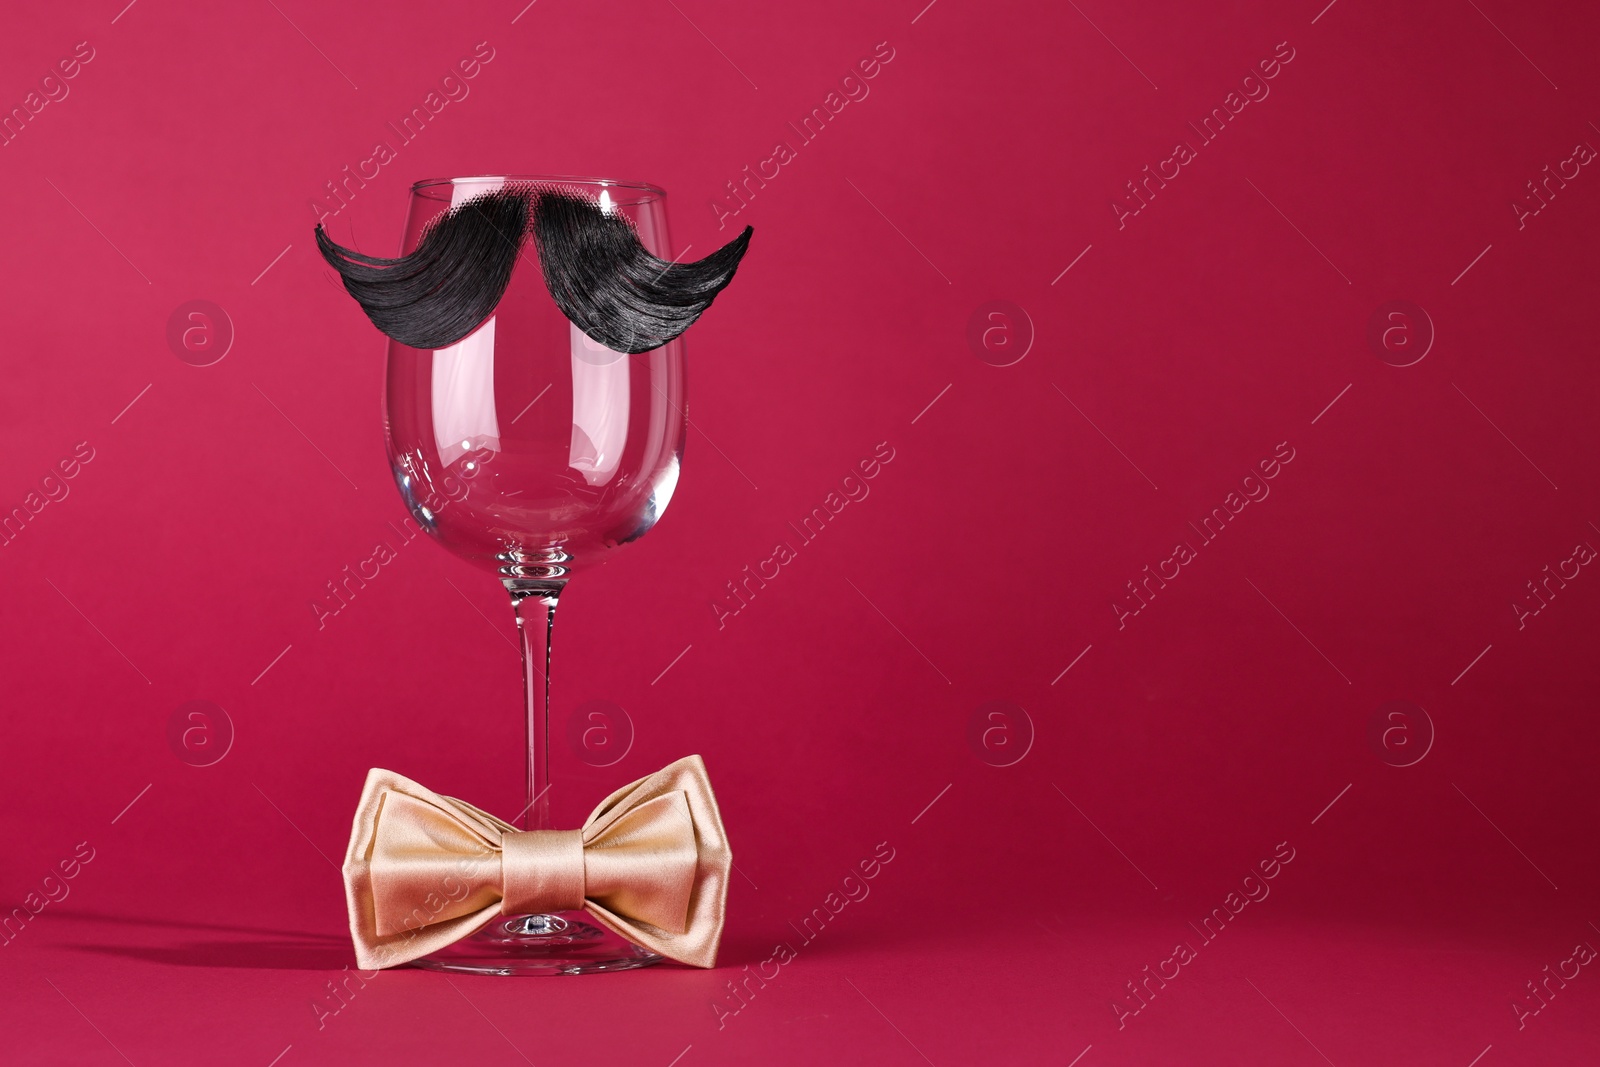 Photo of Man's face made of artificial mustache, bow tie and wine glass on crimson background. Space for text